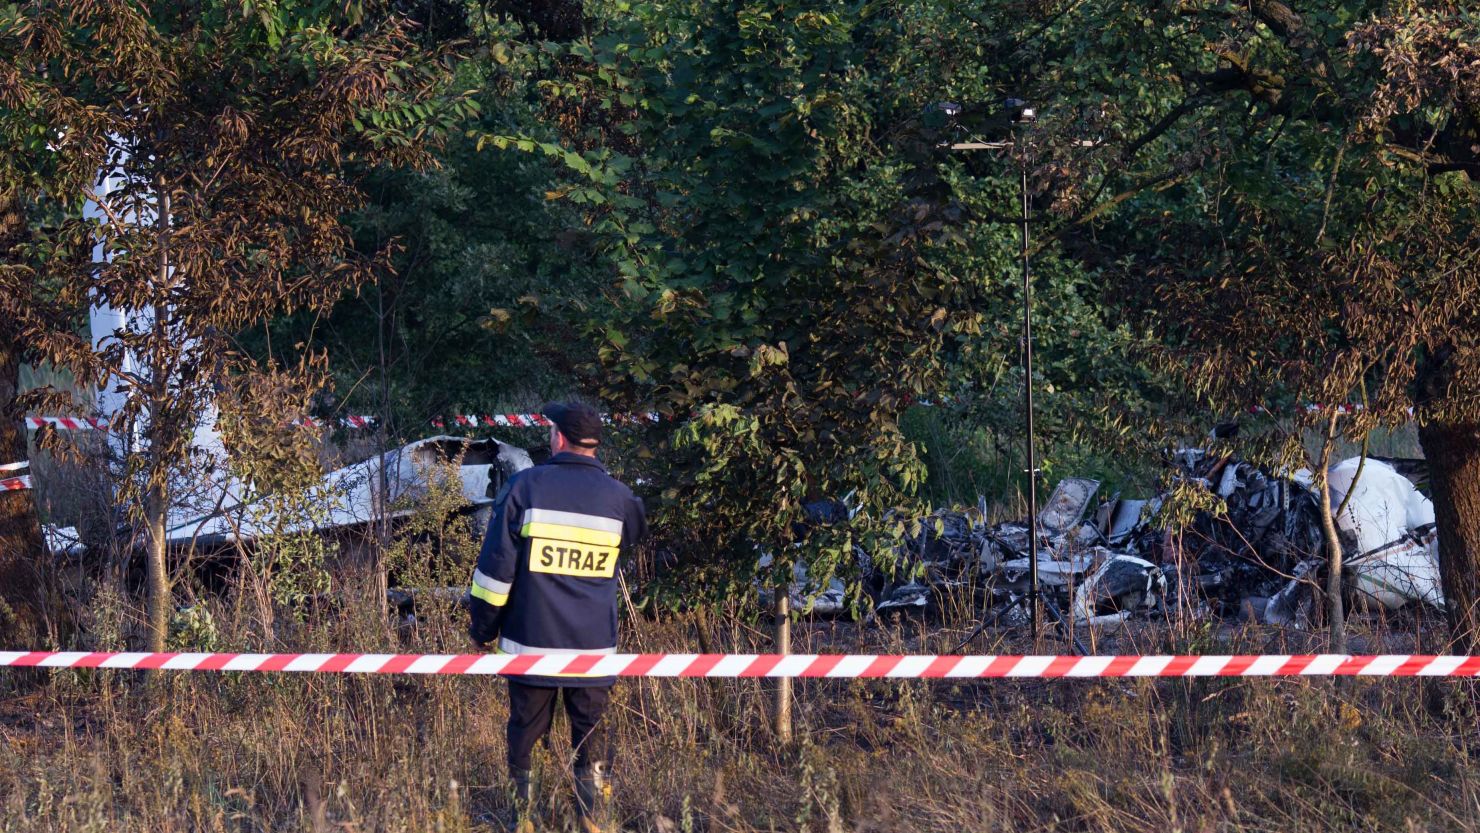 Nine bodies were found in the plane's wreckage, according to police.